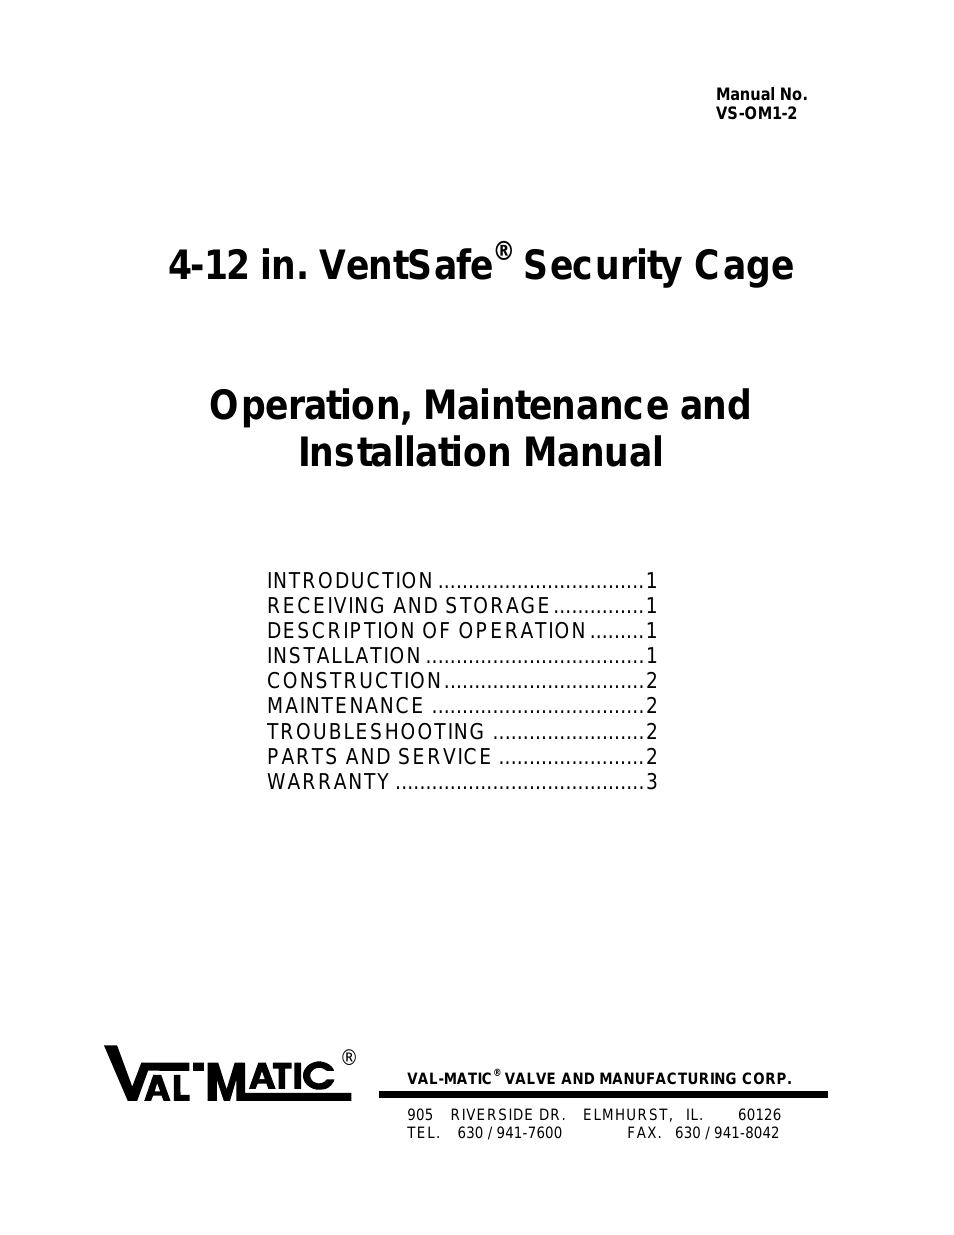 4-12 in. VentSafe Security Cage